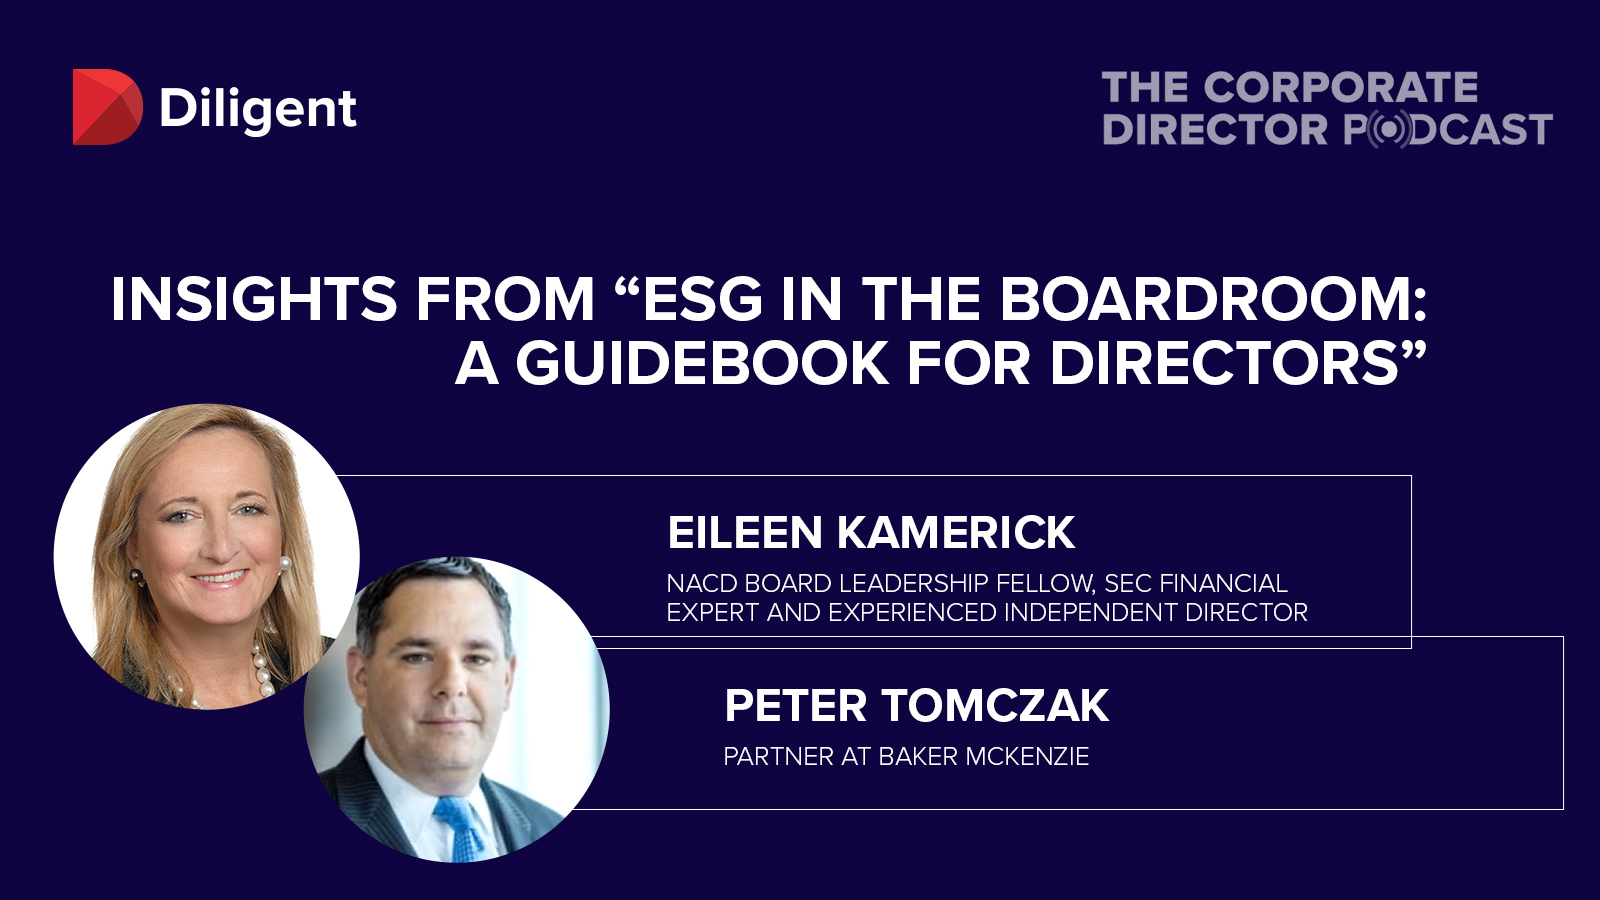 Diligent Corporate Director Podcast Insights from ESG in the Boardroom A Guidebook for Directors